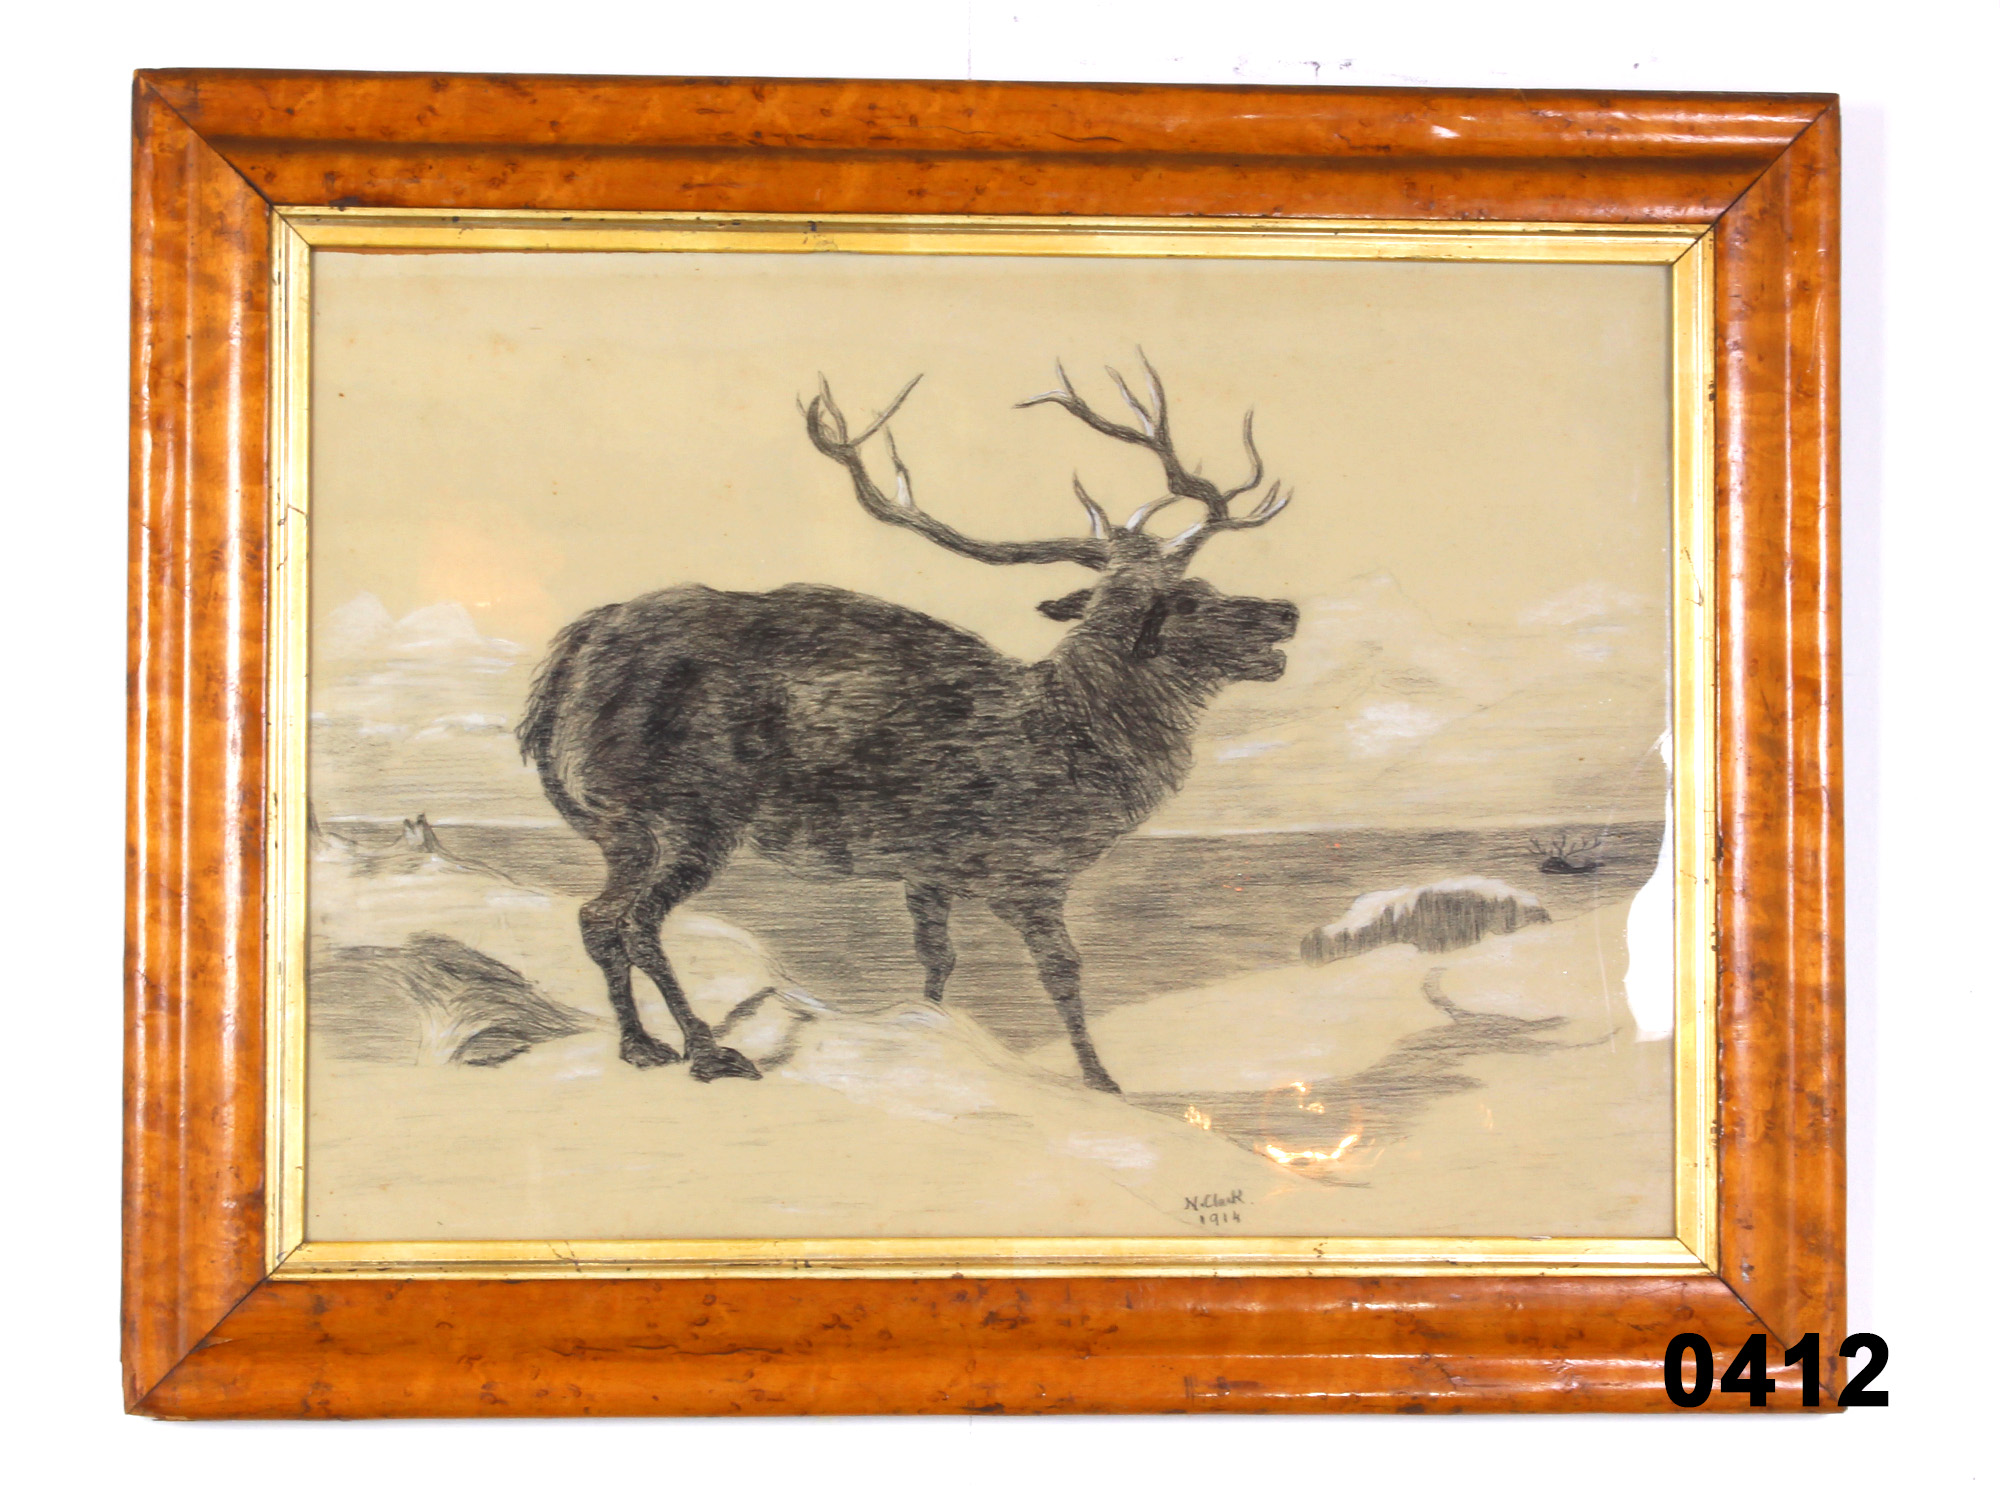 1914 Drawing in Maple Frame